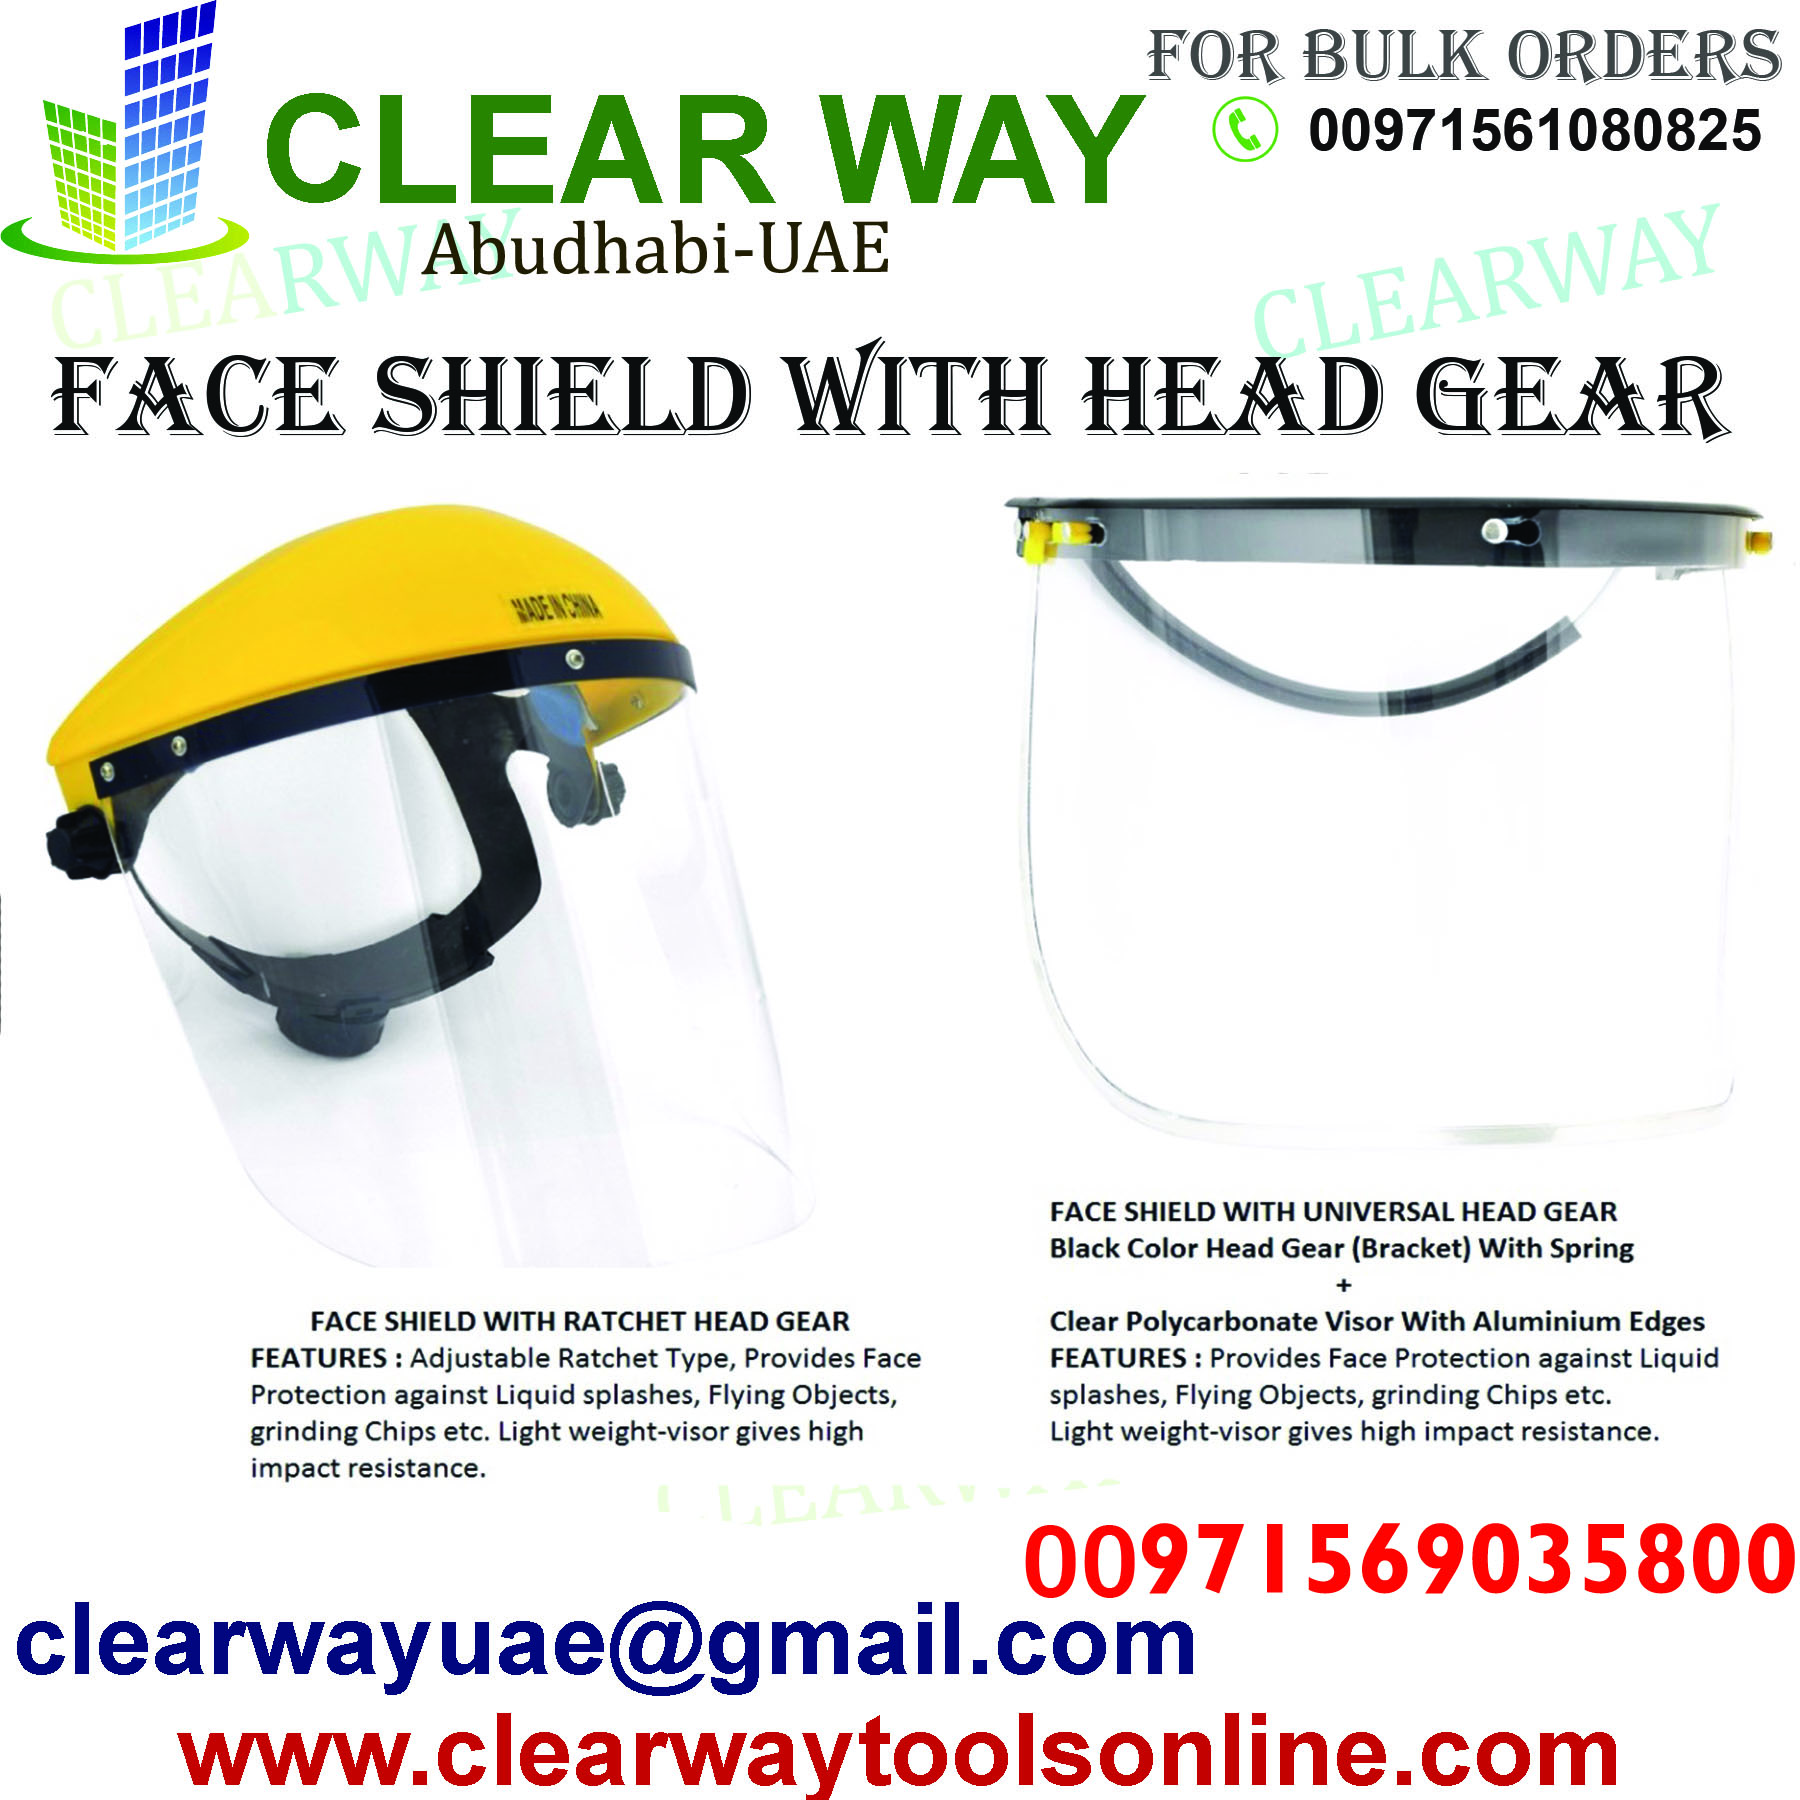 FACE SHIELD WITH HEAD GEAR DEALER IN MUSSAFAH ABUDHABI UAE CLEARWAY